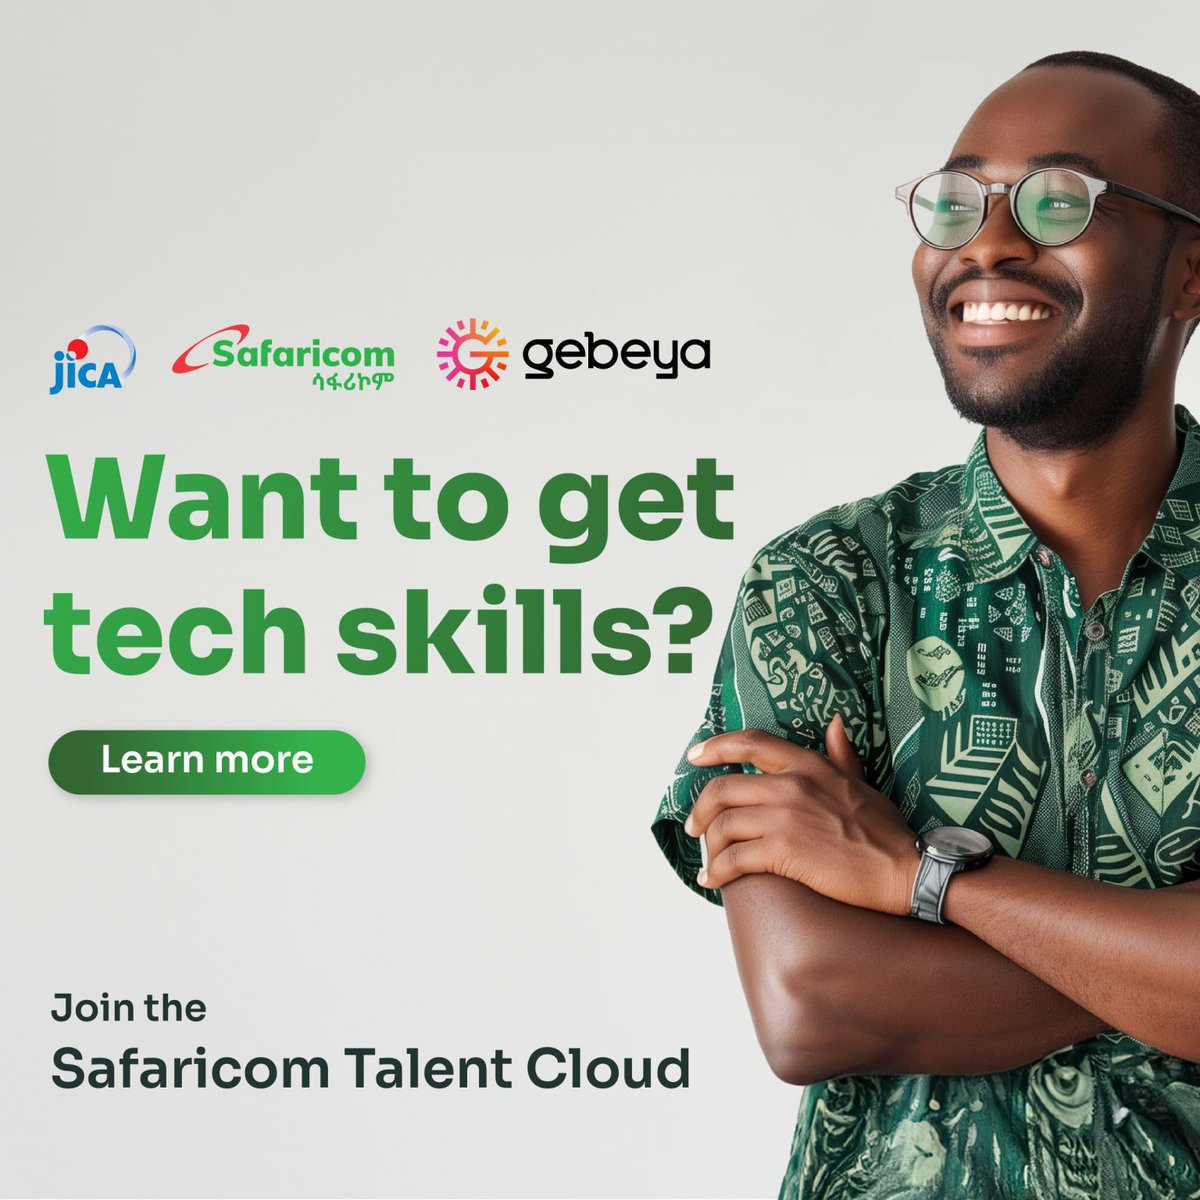 Safaricom Ethiopia has once again partnered with Japan International Cooperation Agency (JICA) and Gebeya to create the Safaricom Talent Cloud. The program includes software development, AI & data, infrastructure, project management, and security. Upscale your tech skills today!